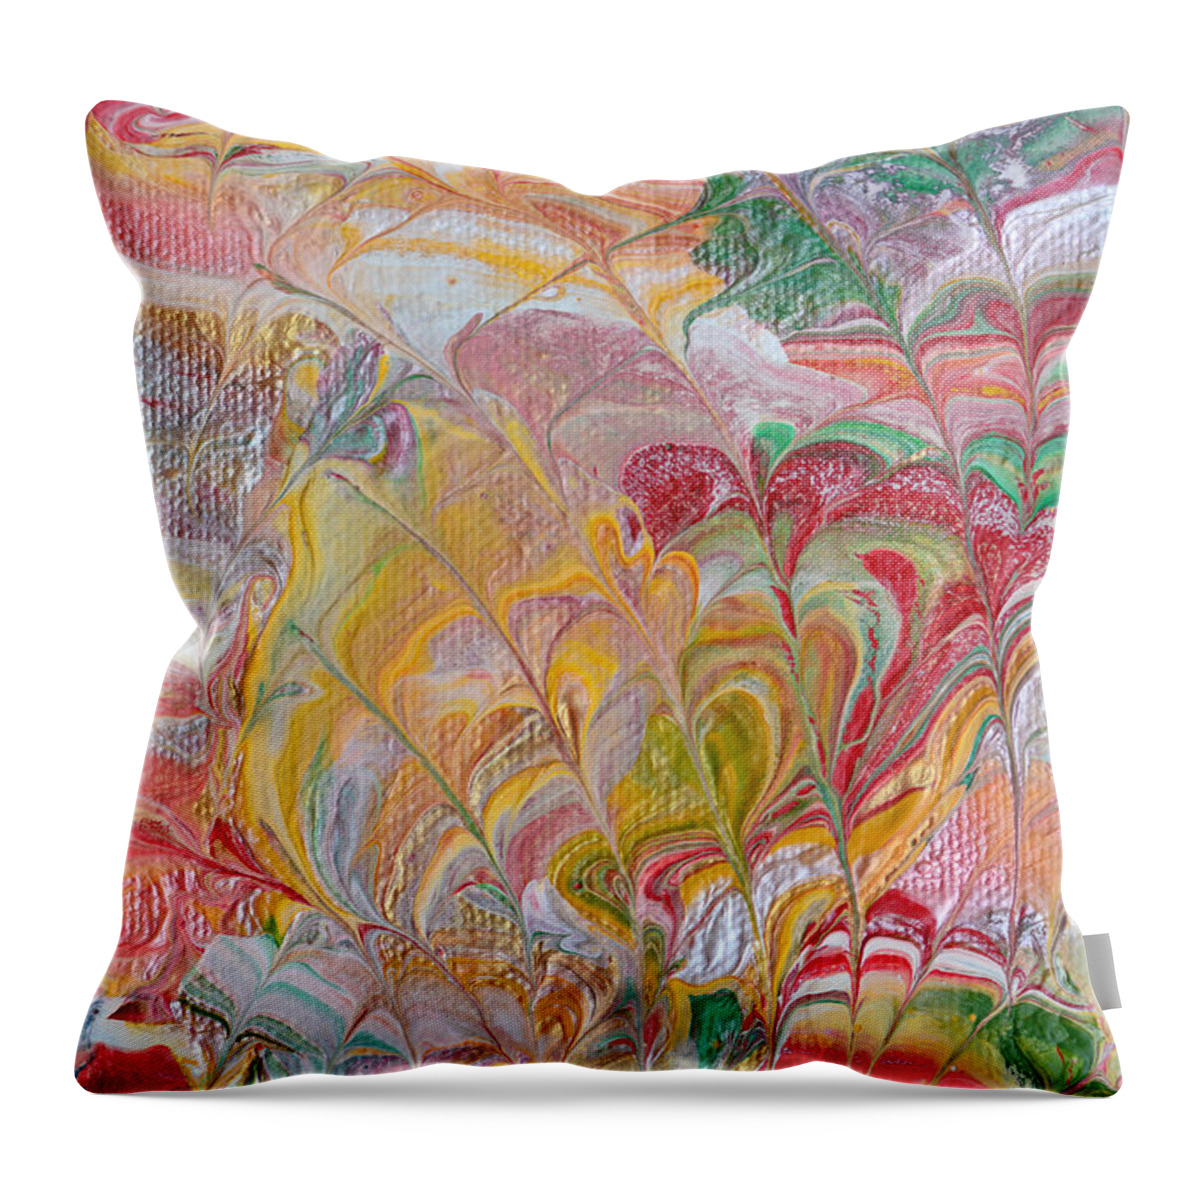 Colorful Abstract Throw Pillow featuring the painting Hot Air Balloons by Donna Blackhall